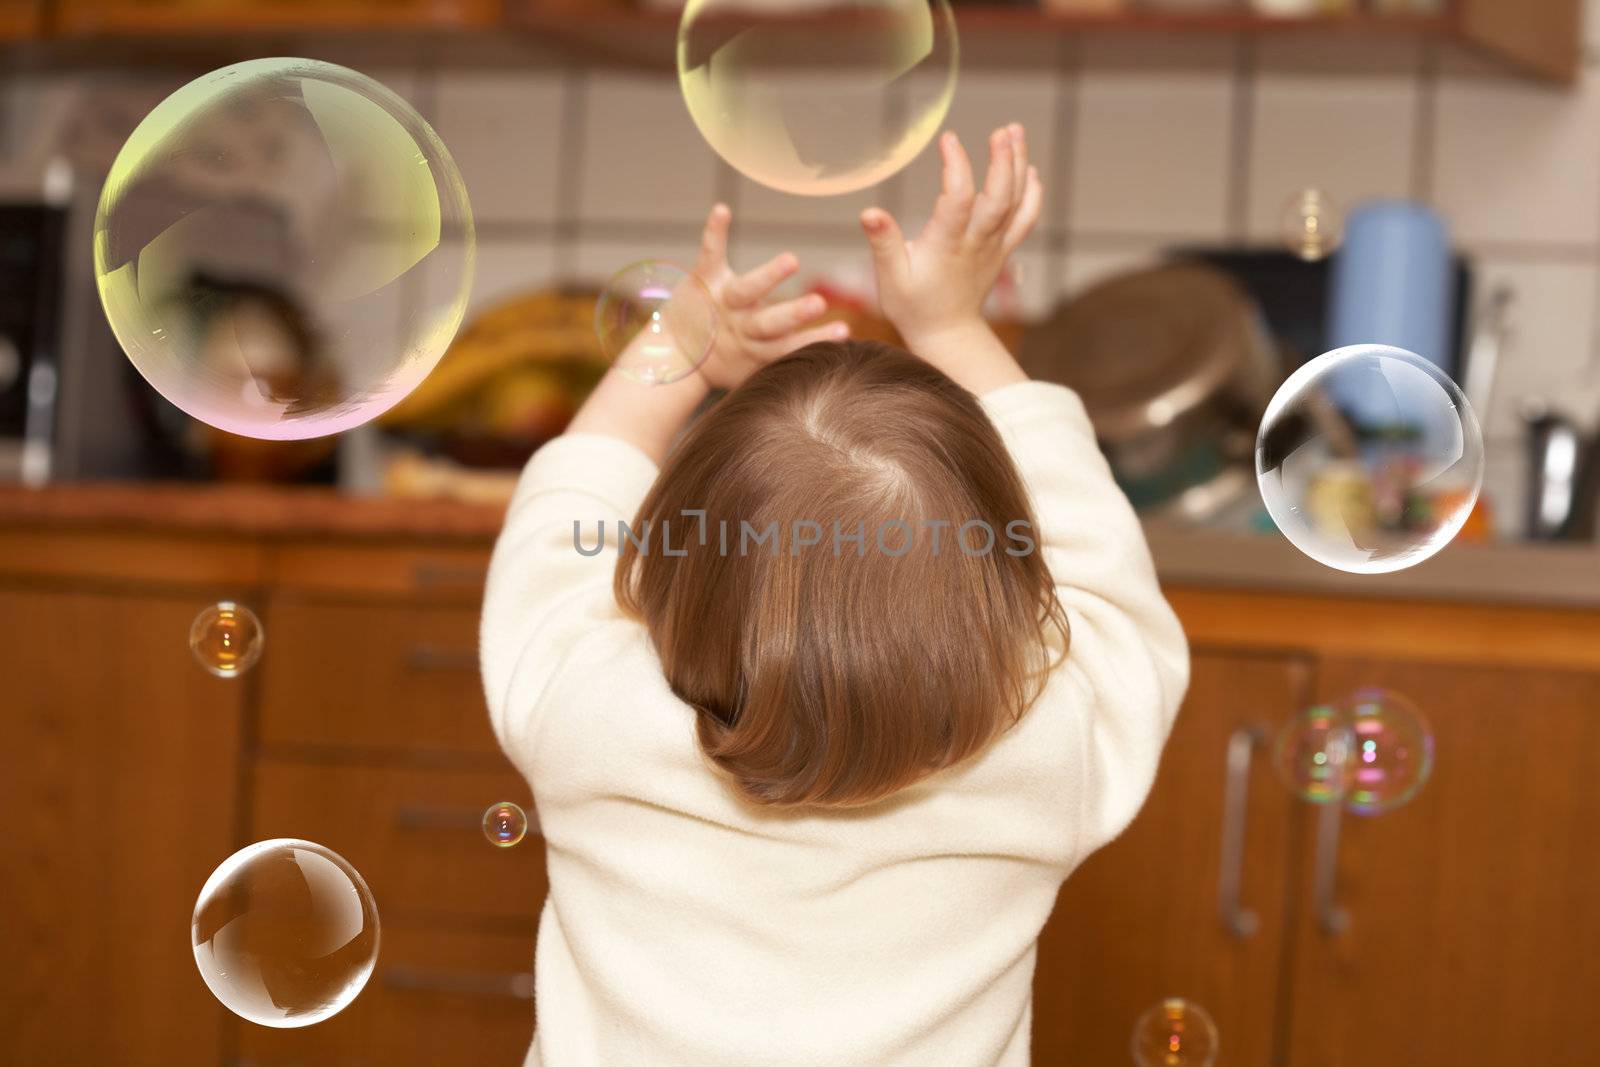 The small girl plays with soap bubbles. Childhood